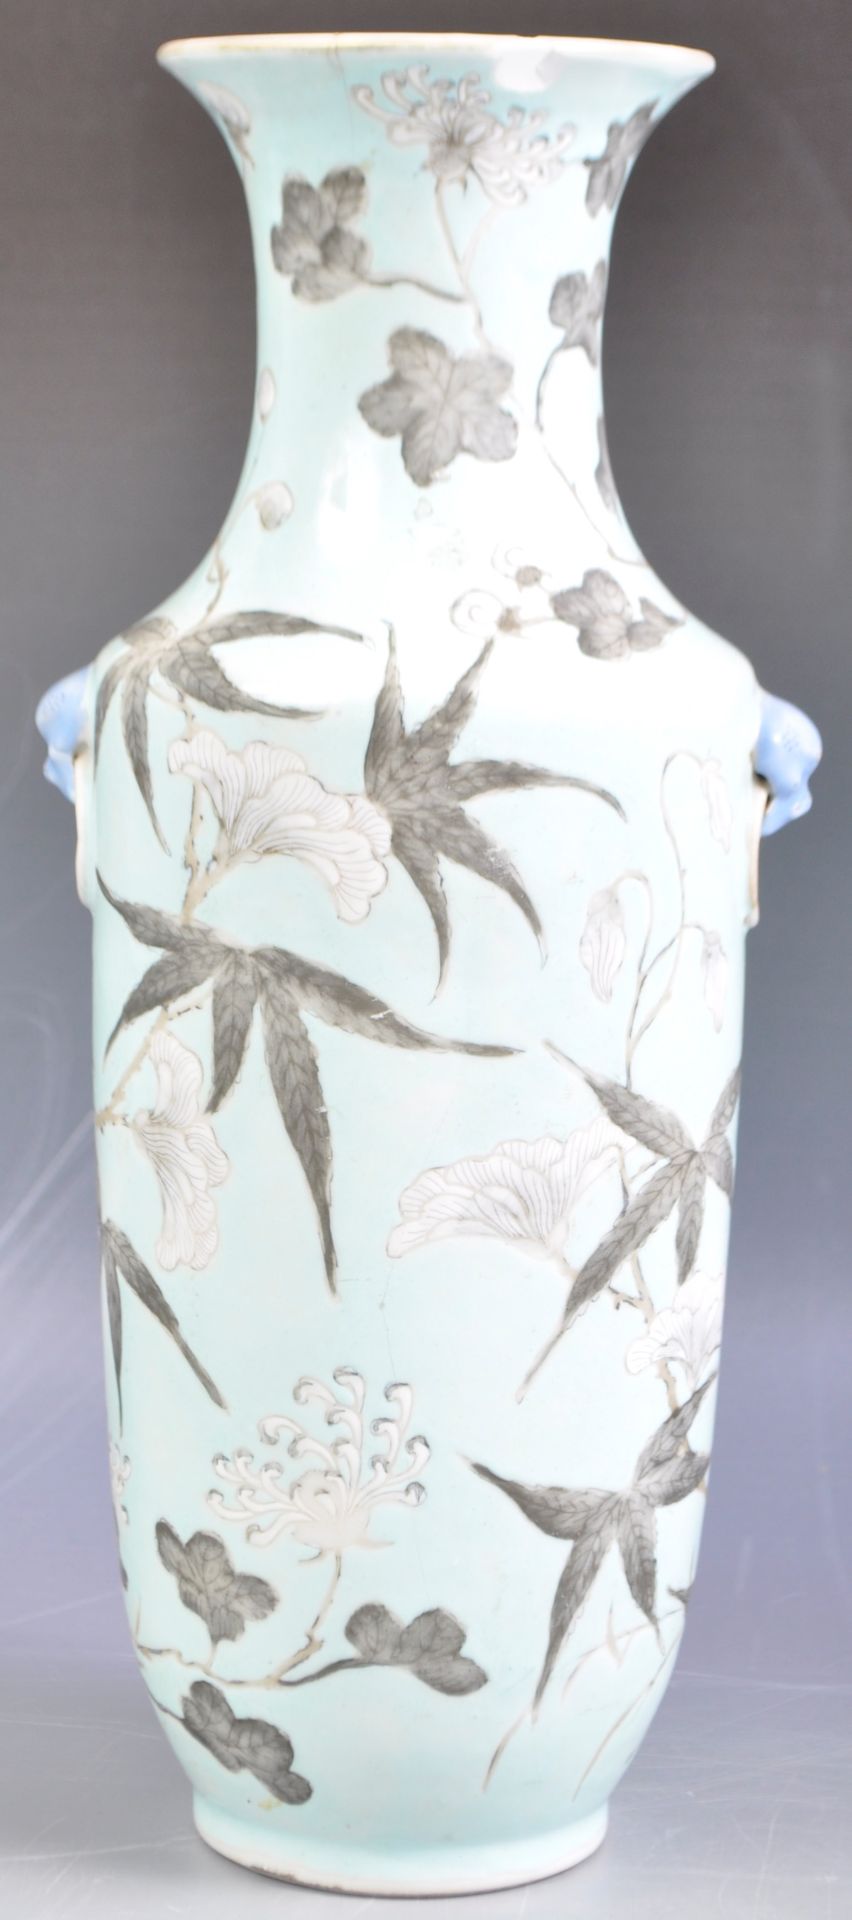 ANTIQUE 19TH CENTURY CHINESE PORCELAIN ROULEAU VASE IN TEAL - Image 2 of 7